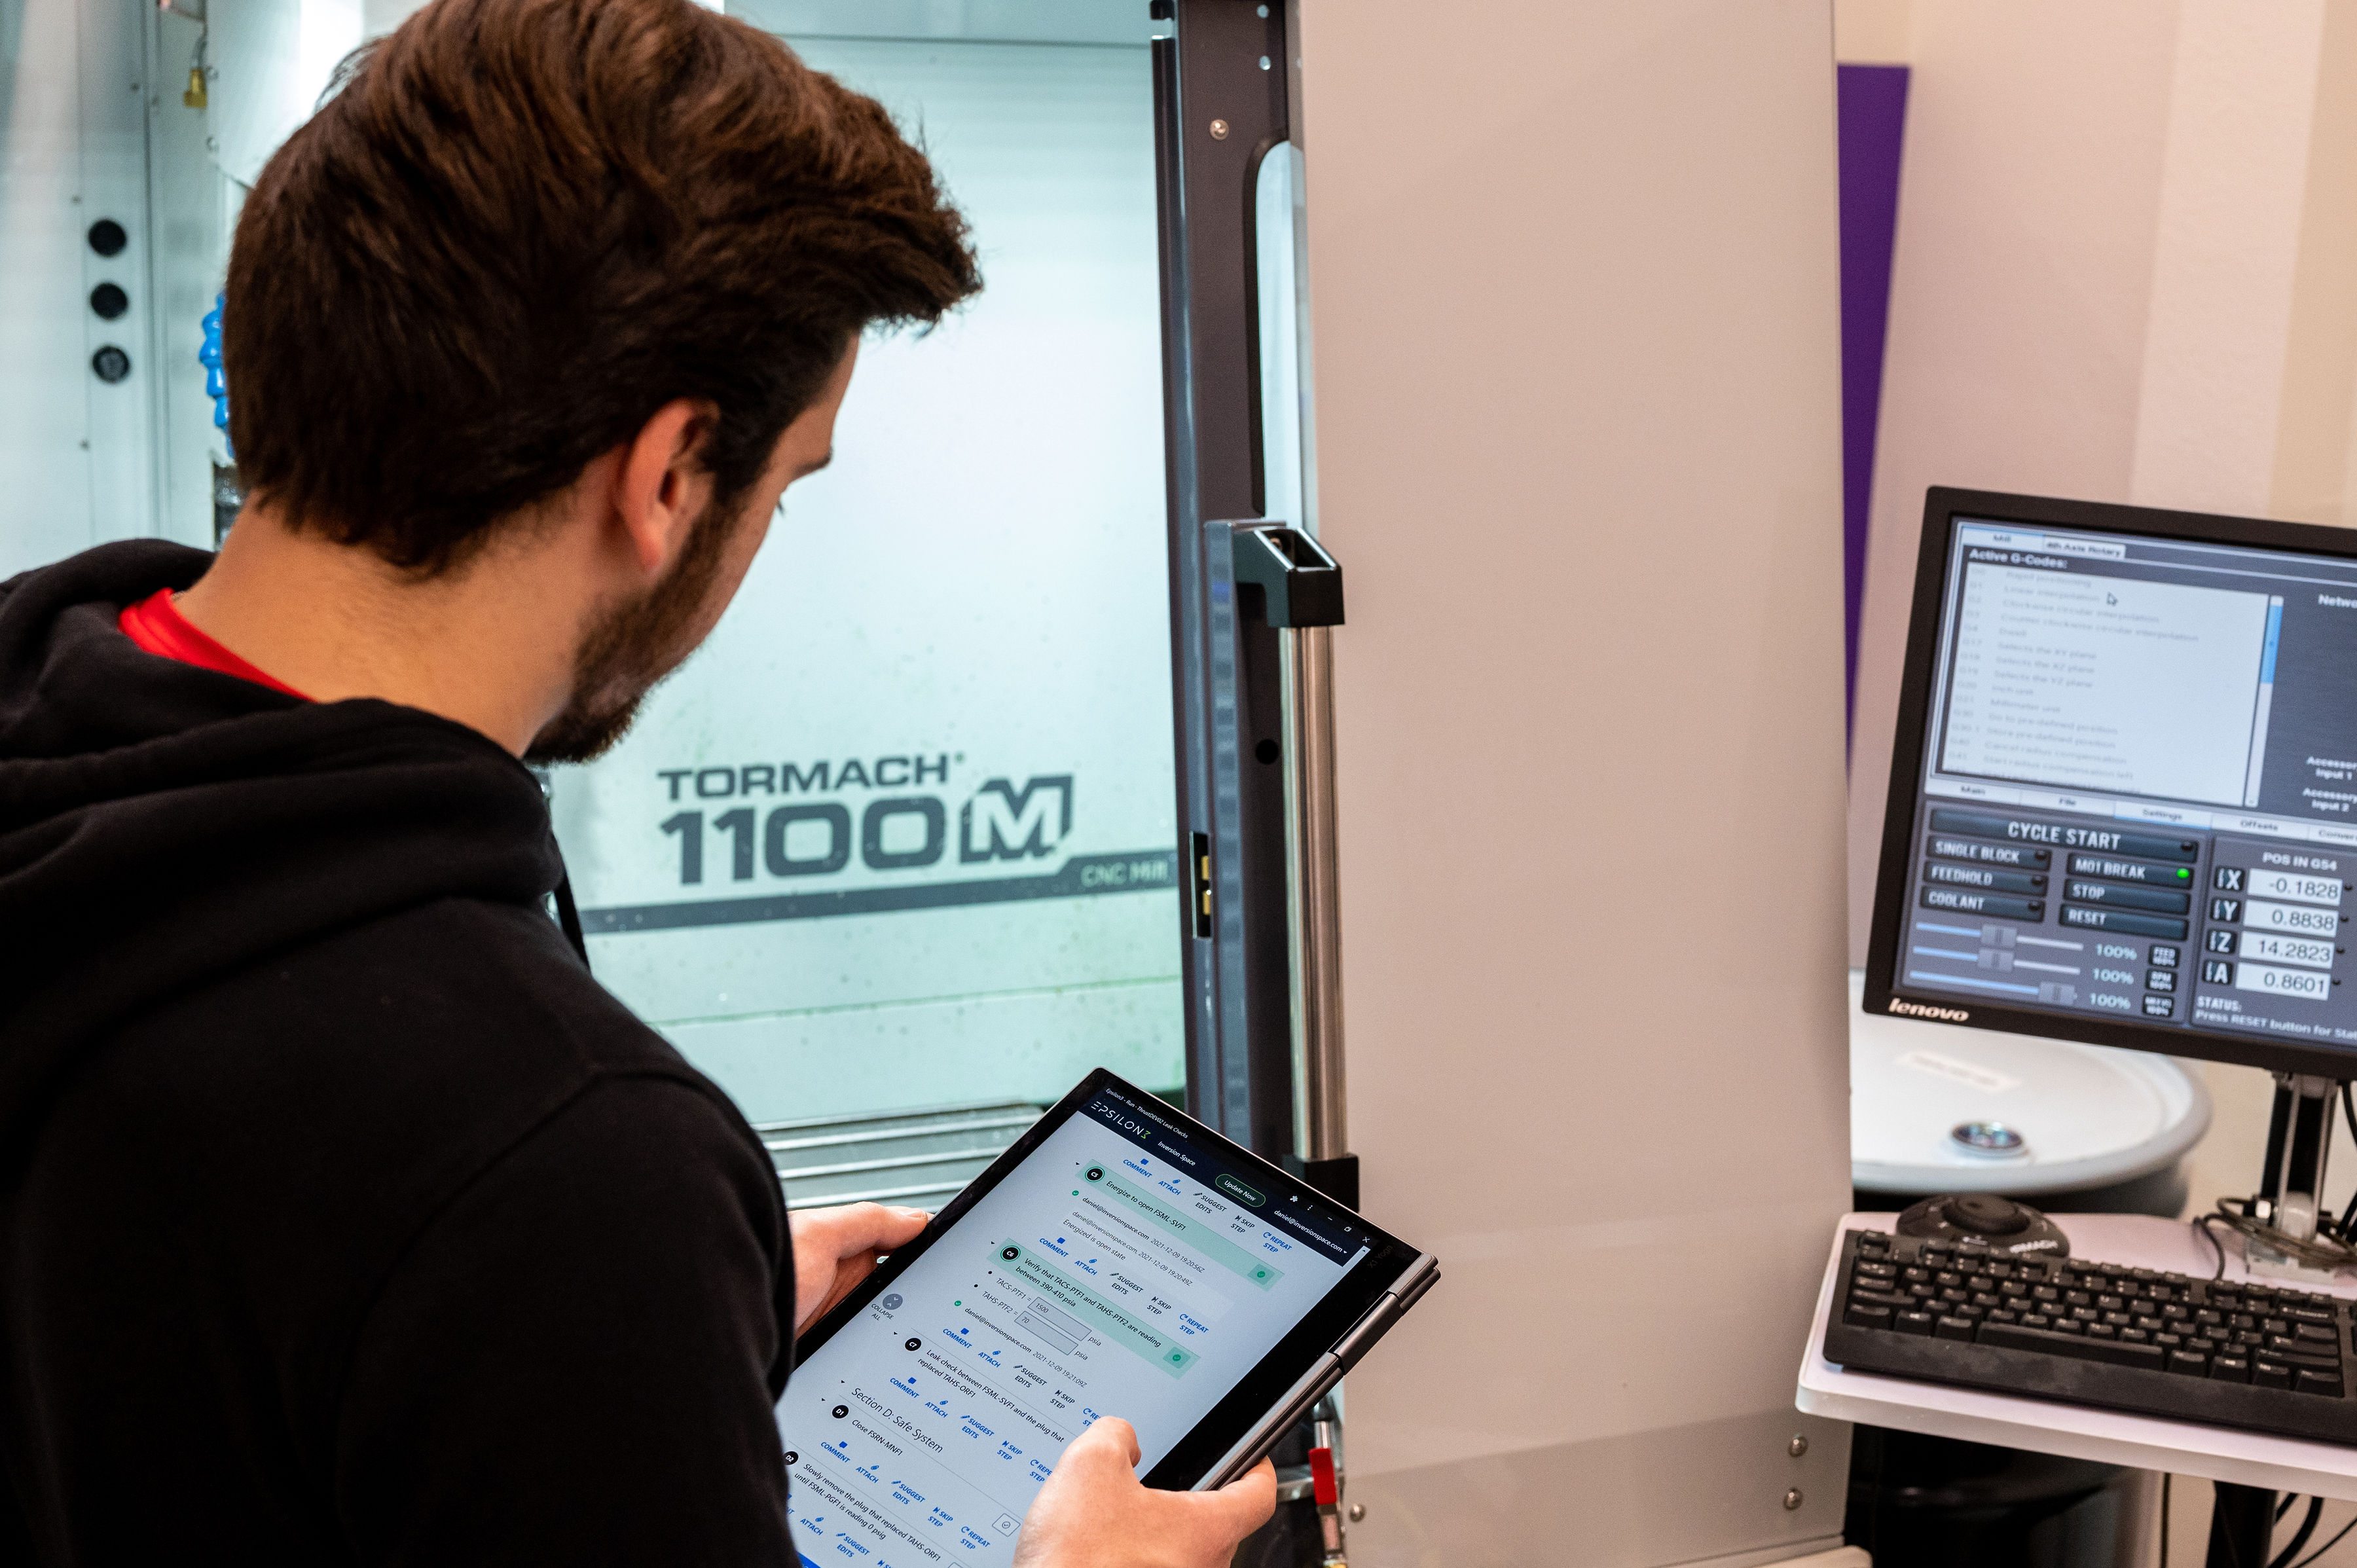 An Epsilon3 employee compares data from tests on multiple screens.